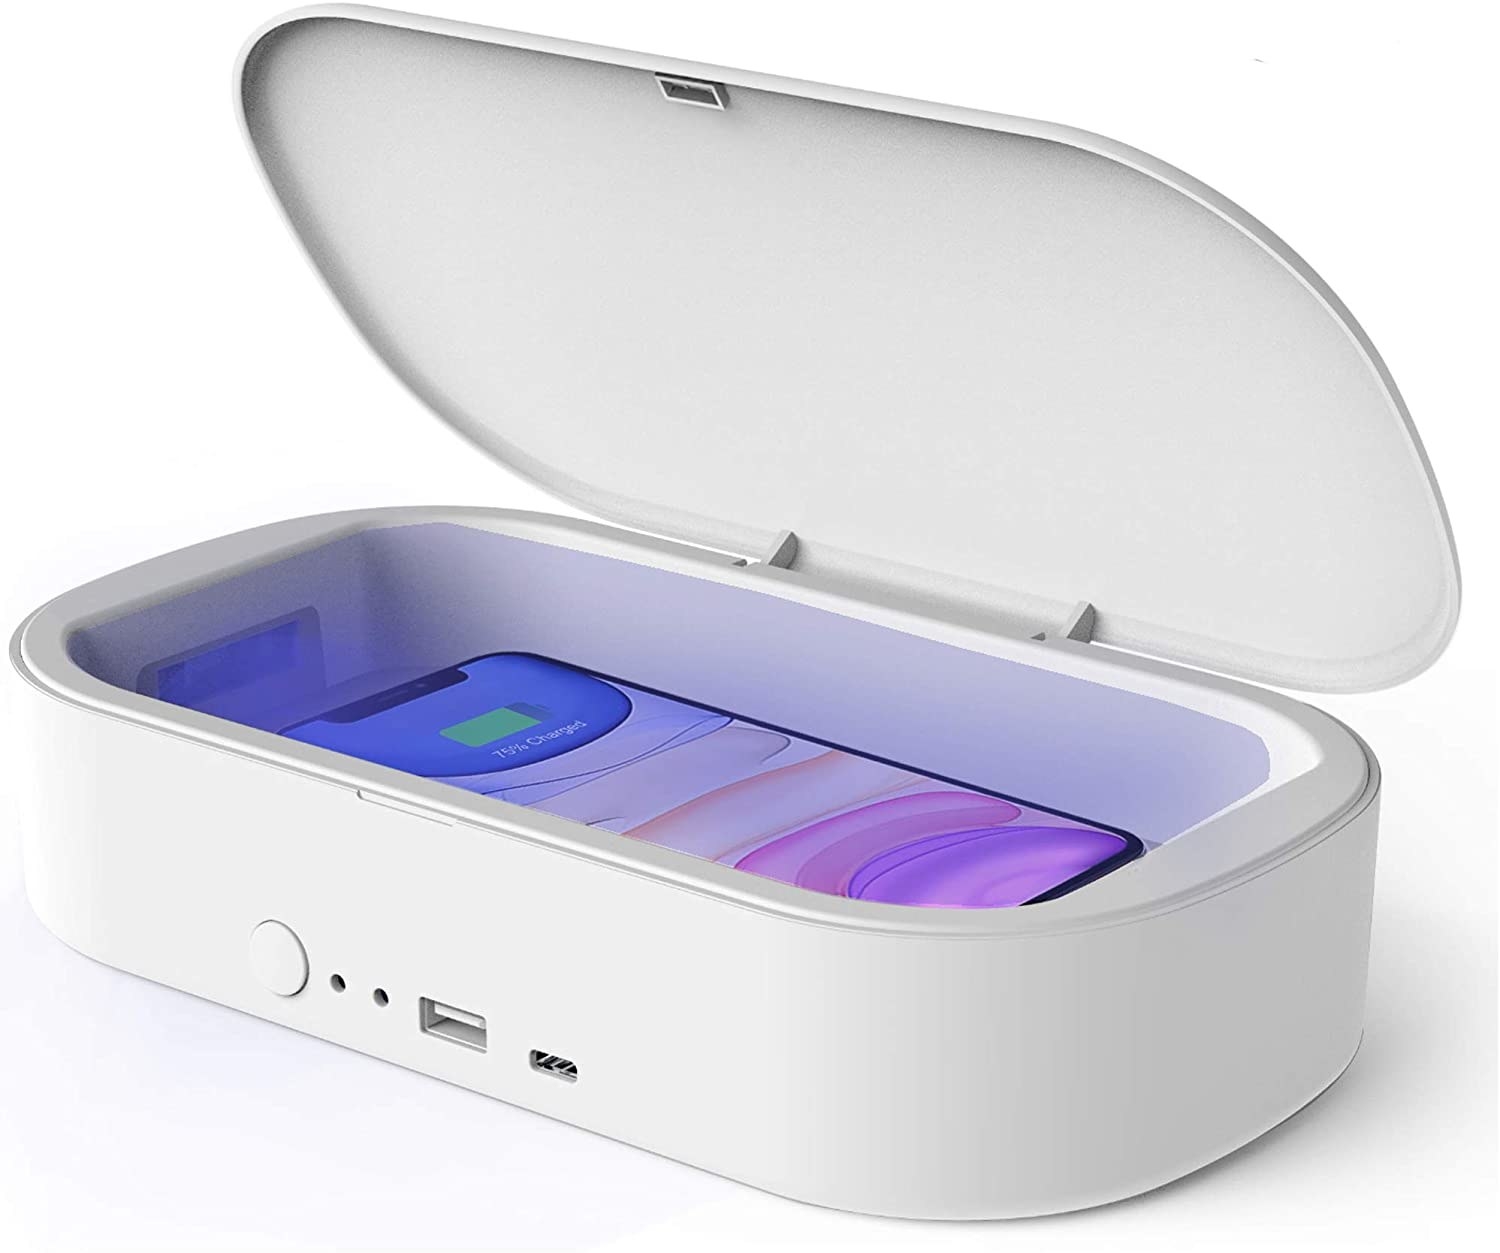 an iPhone sits inside the VCUTECH UV sanitizer and phone charger